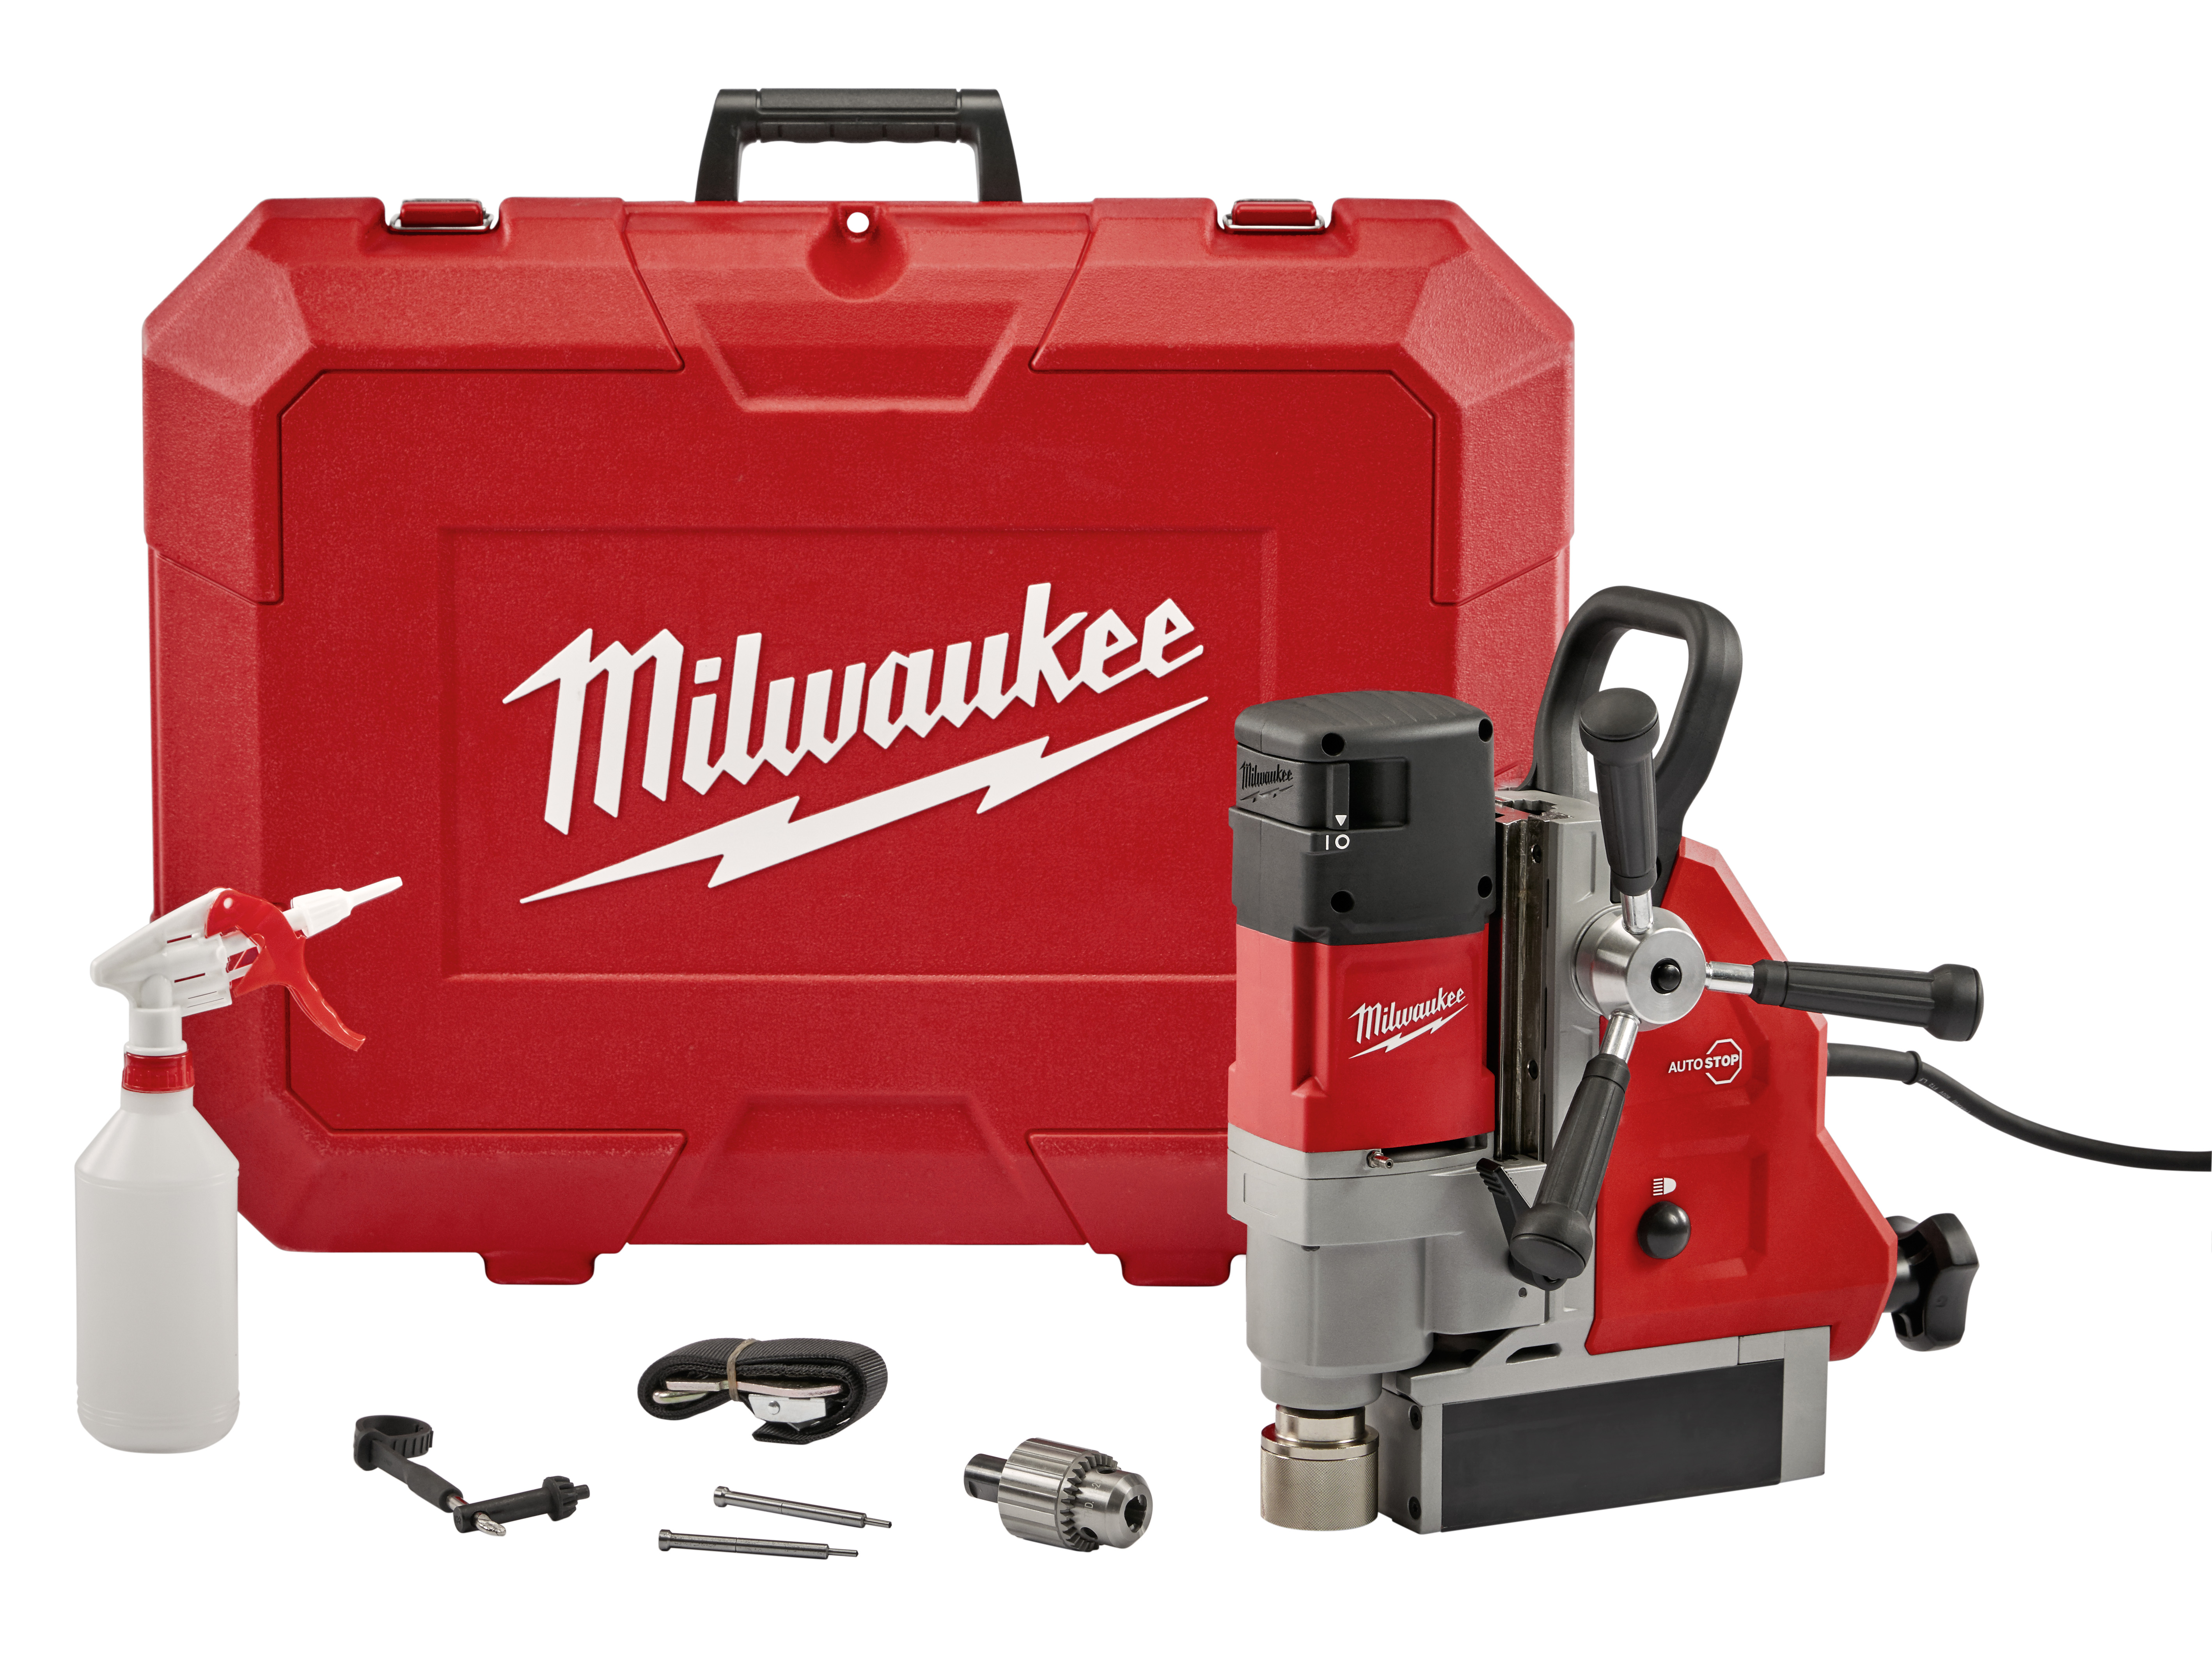 Milwaukee® 4272-21 Compact Electromagnetic Drill Kit, 3/4 in Chuck, 2.3 hp, 1-1/4 in Drill to Center From Base, 475/730 rpm Spindle Speed, 120 VAC